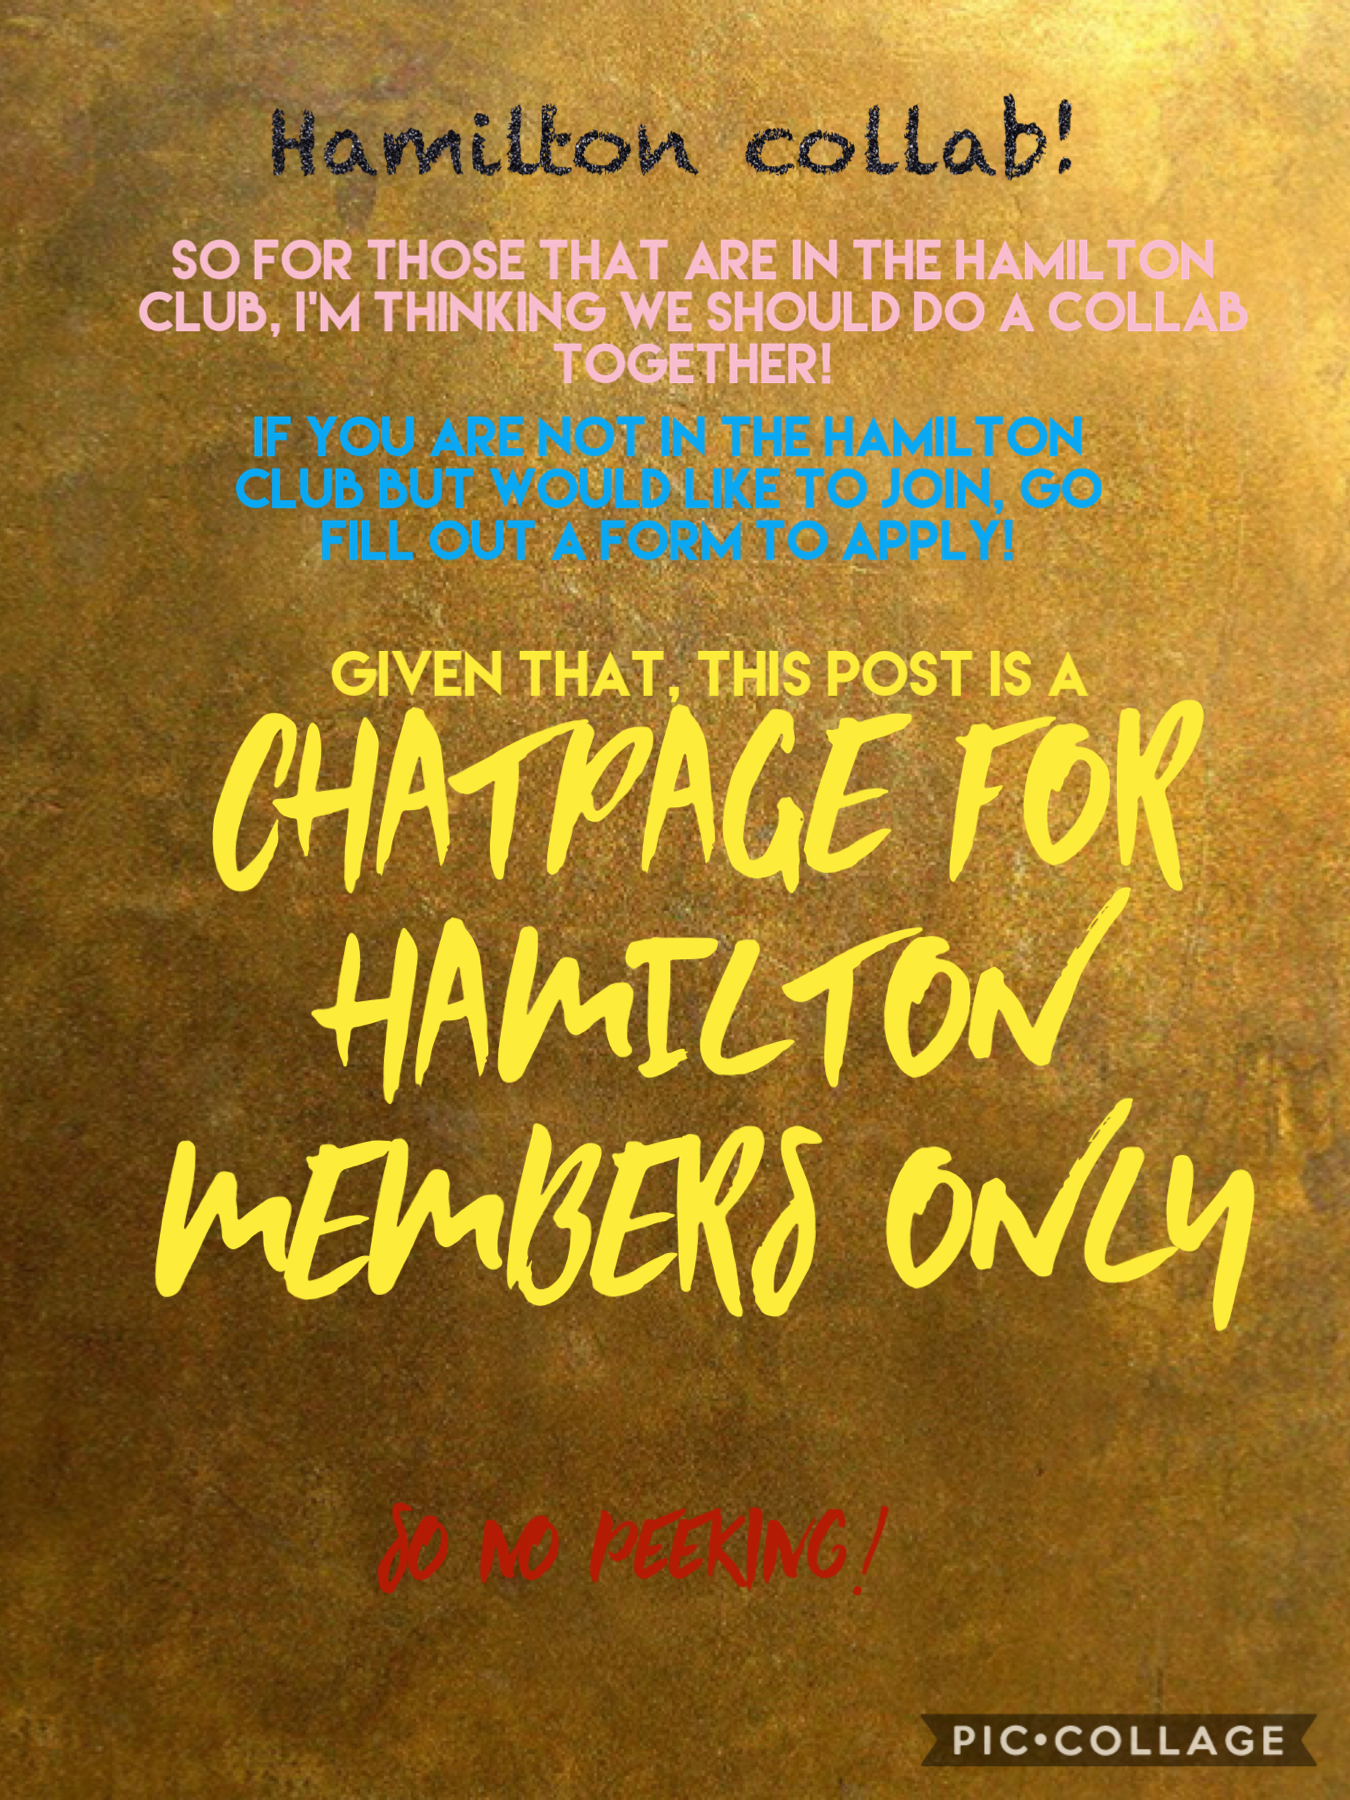 CHATPAGE FOR HAMILTON CLUB MEMBERS ONLY 


if you see this, then comment 🧐 for a shoutout!